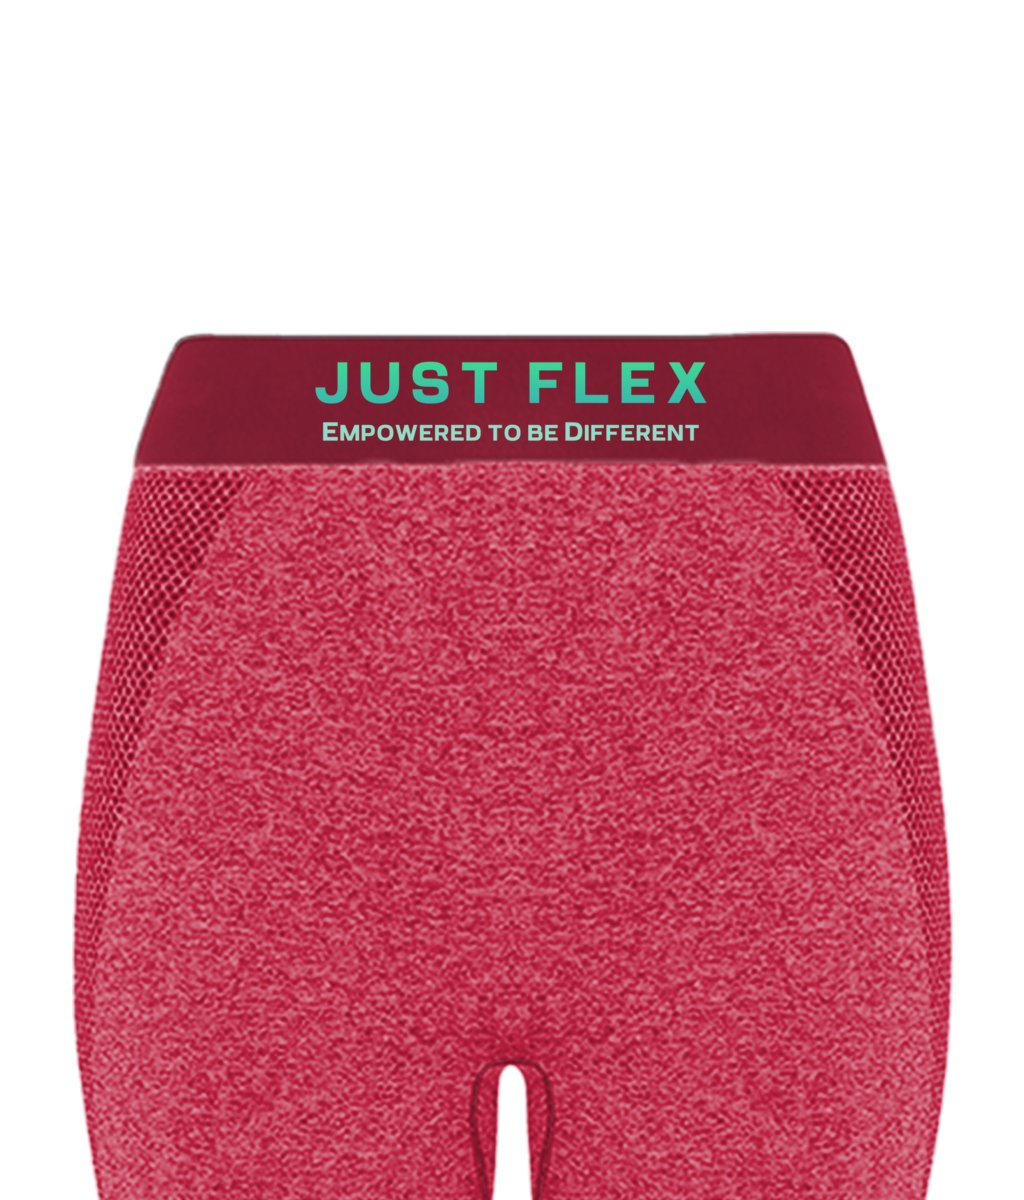 Just Flex - Empowered To Be Different Womens TriDri® Seamless '3D fit' Sports Leggings